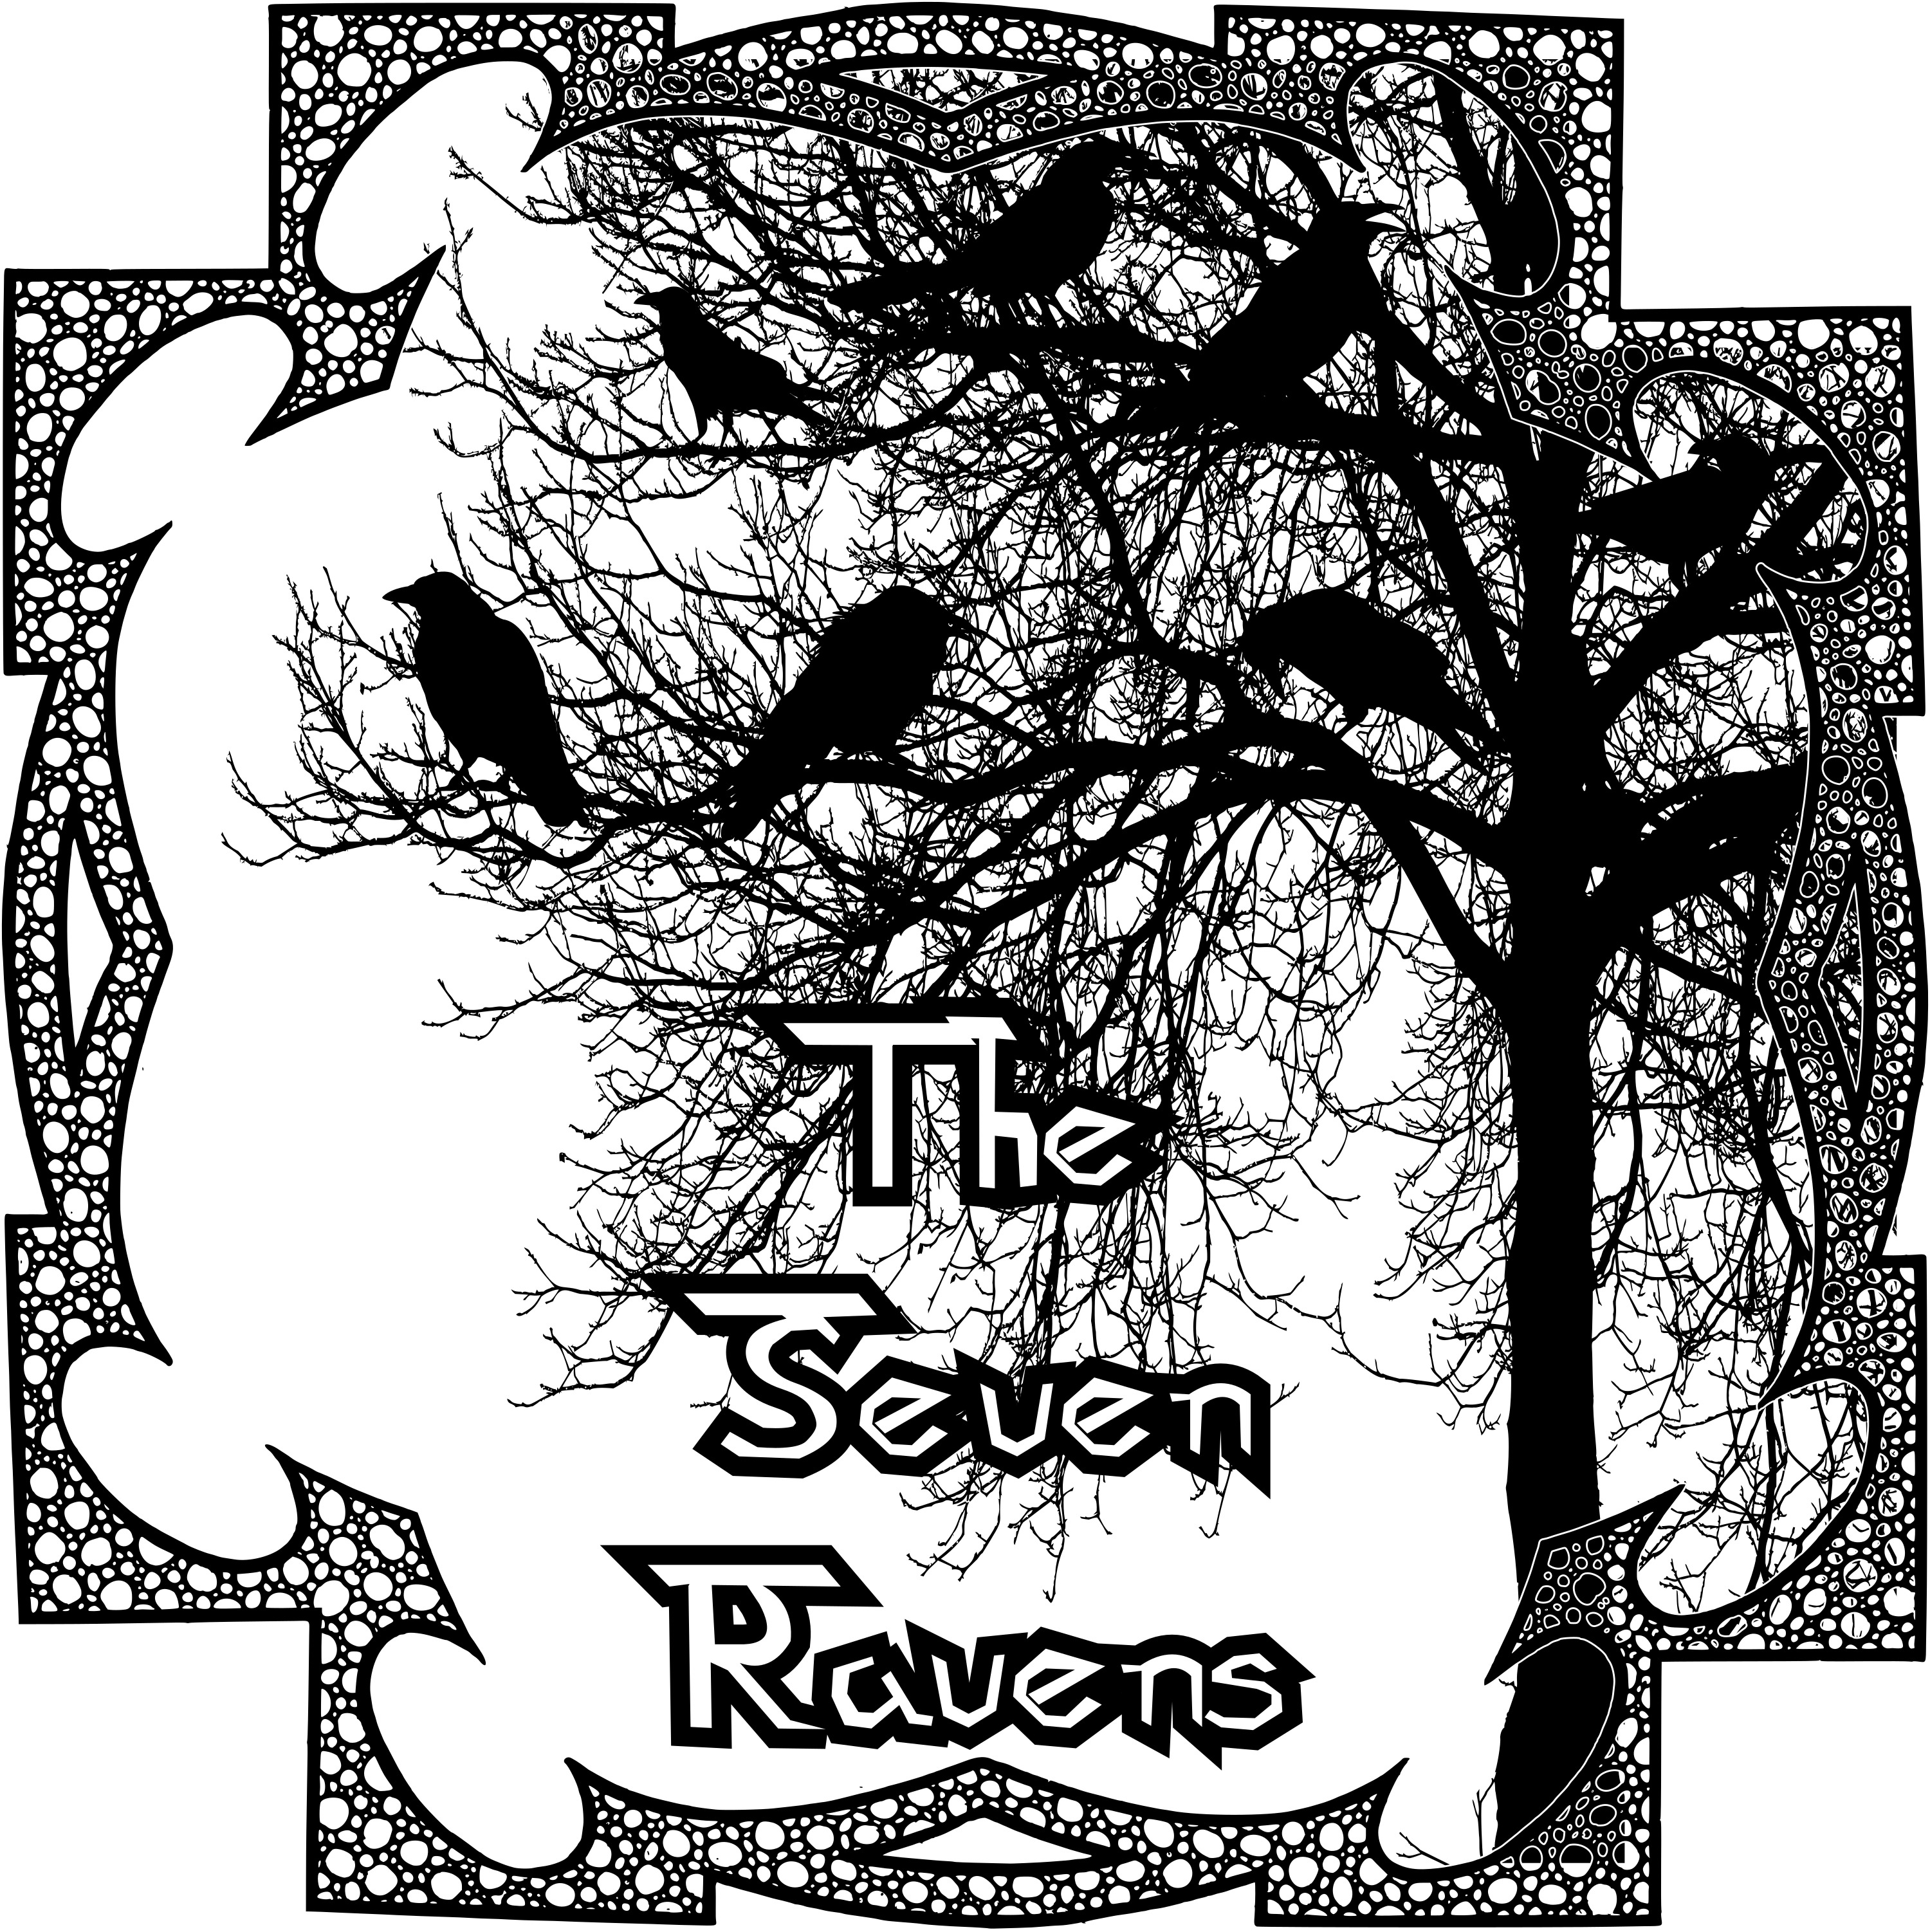 The Seven Ravens cover image portraying a silouette of a tree with ravens perched on it.